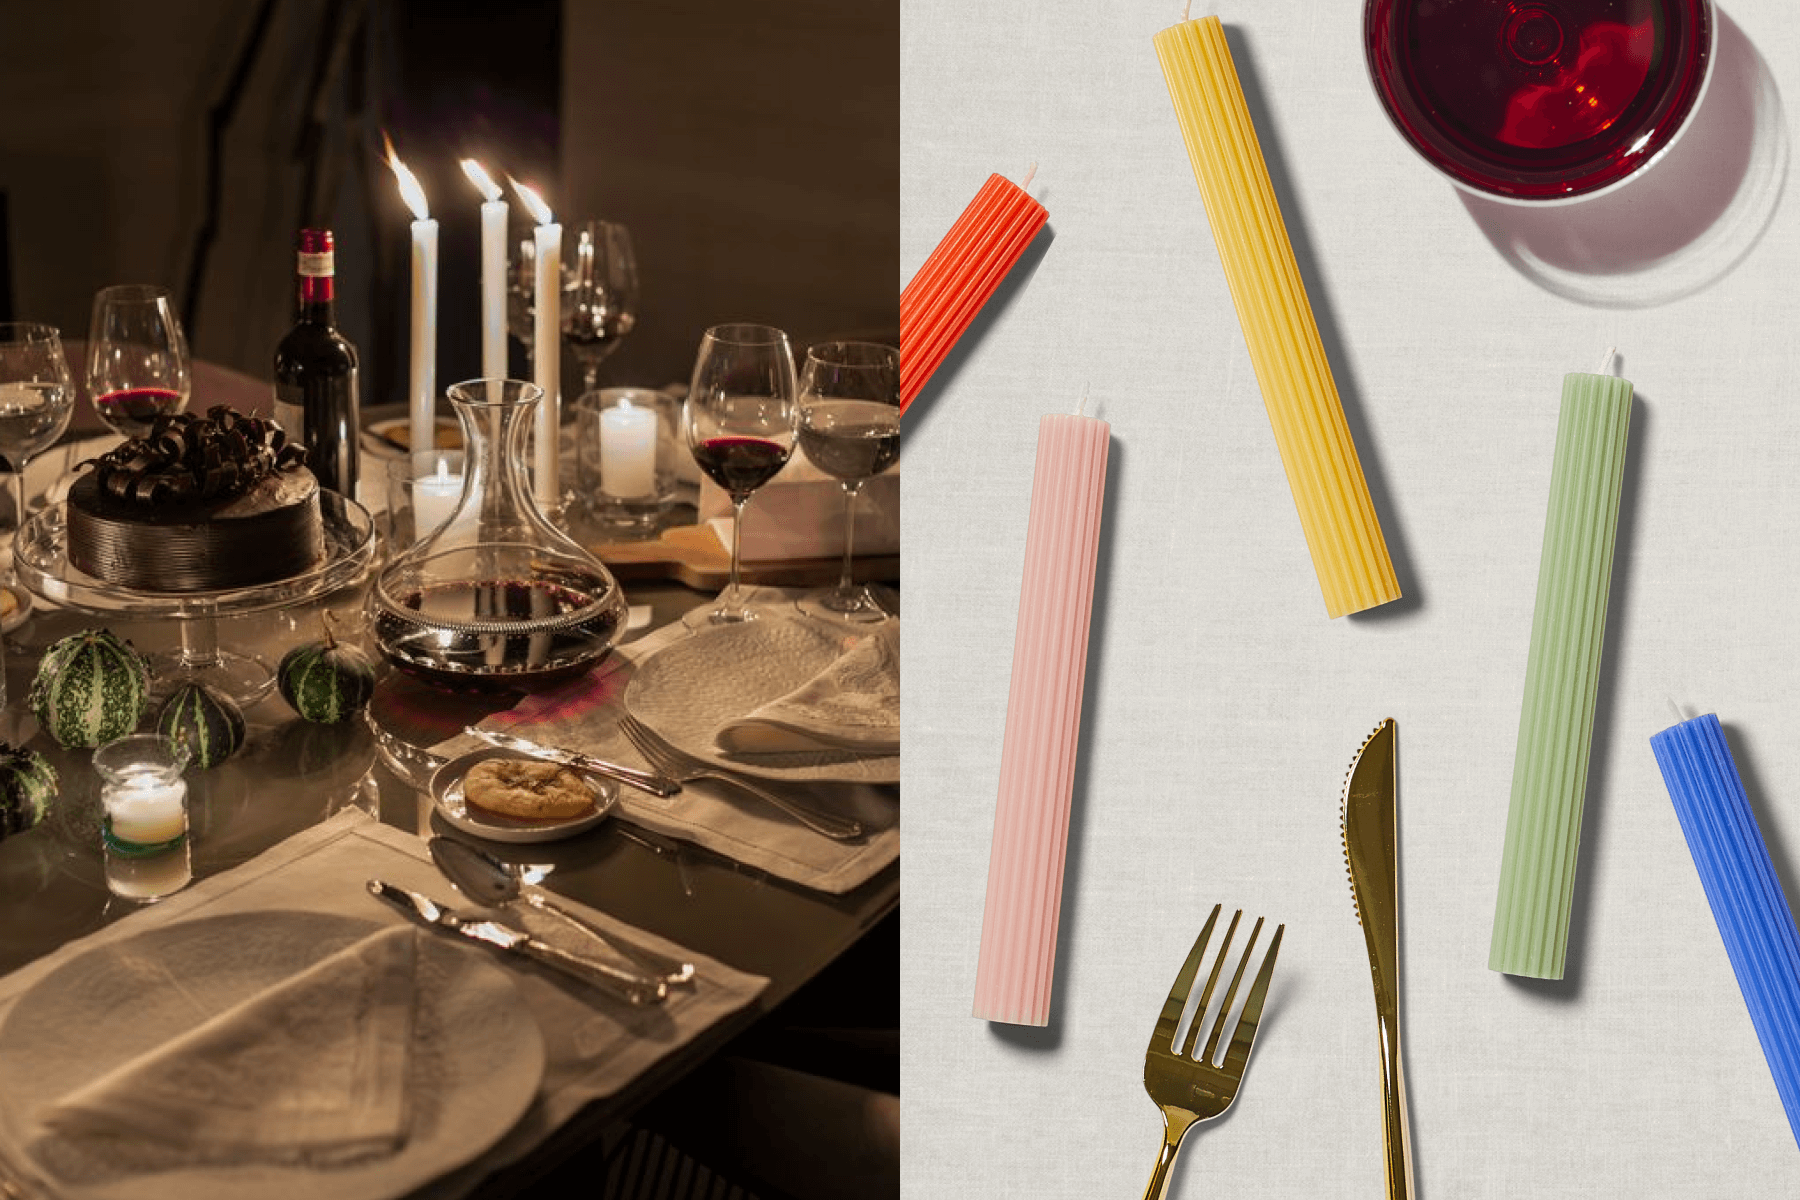 Left: A candle lit dinner table set for dessert with chocolate cake and red wine; Right: Rainbow colored table candles scattered on a white table. 